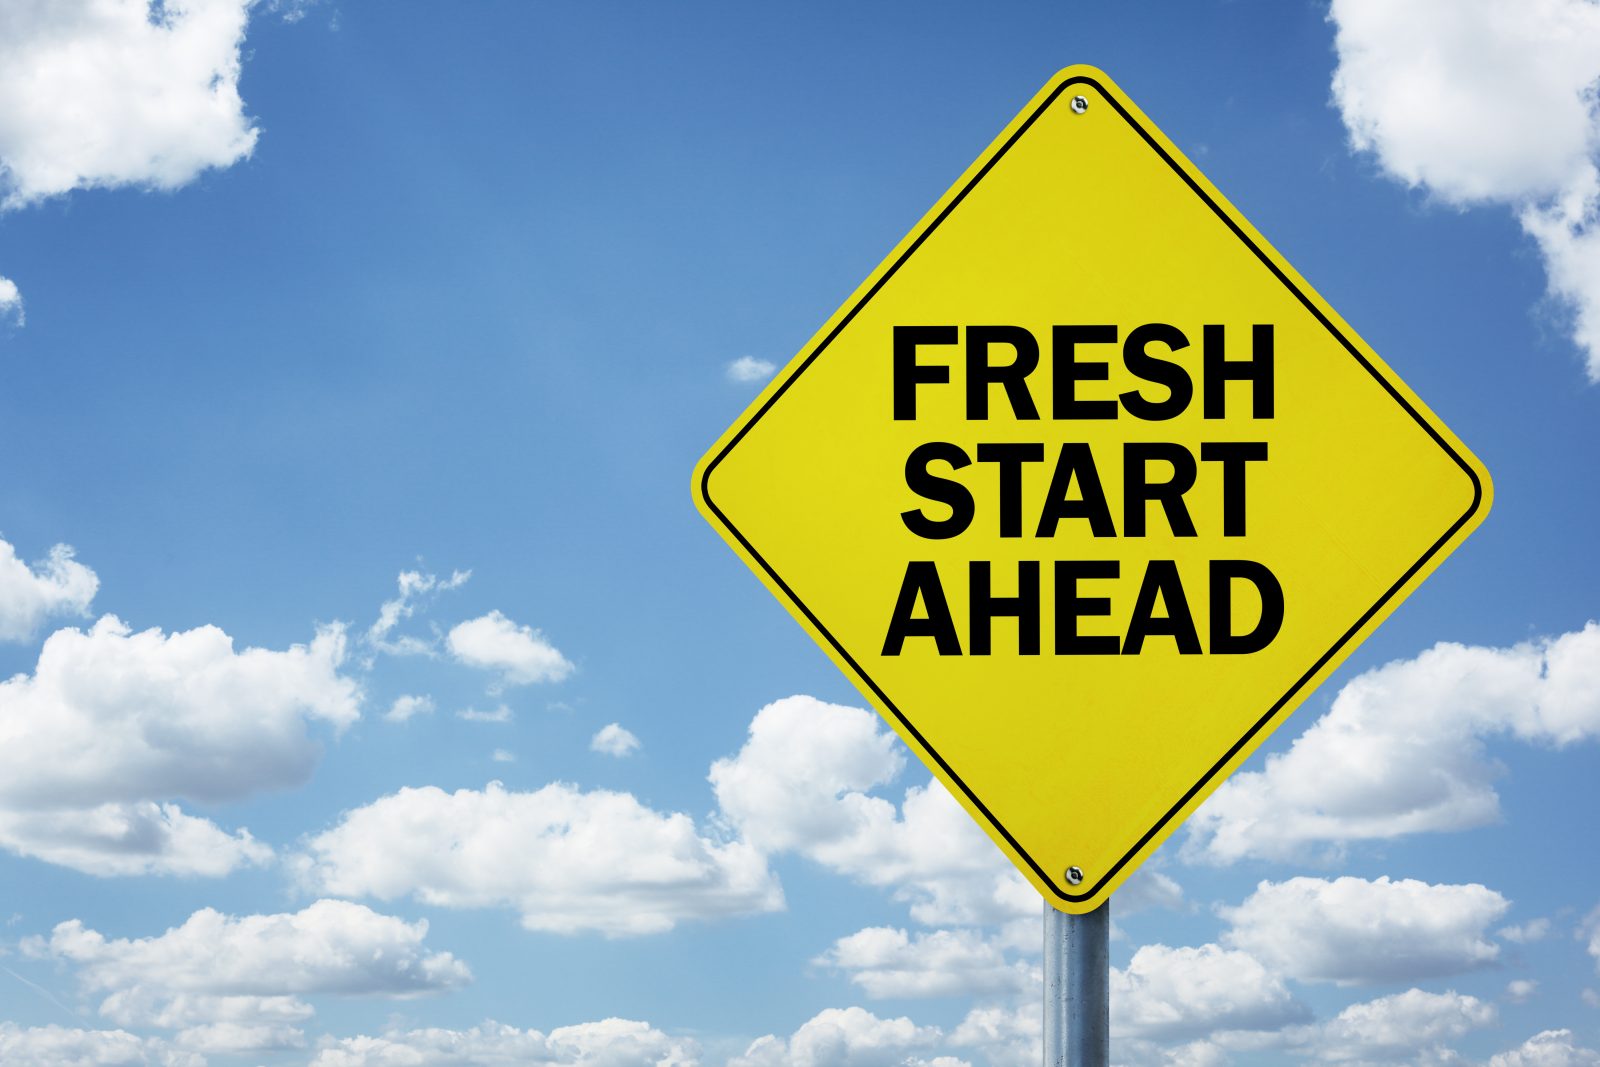 Fresh start ahead road sign concept for business opportunity, future and new career